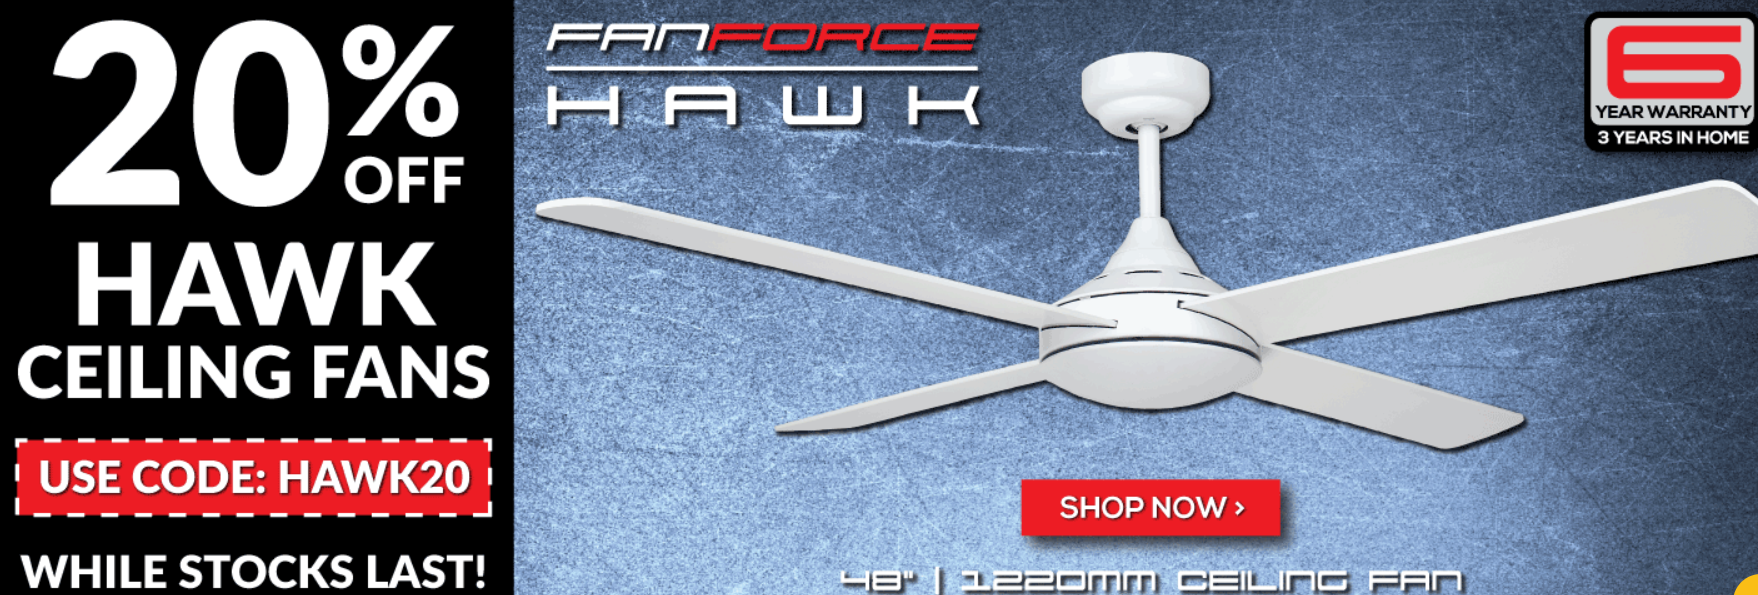 Save extra 20% OFF on Hawk ceiling fans